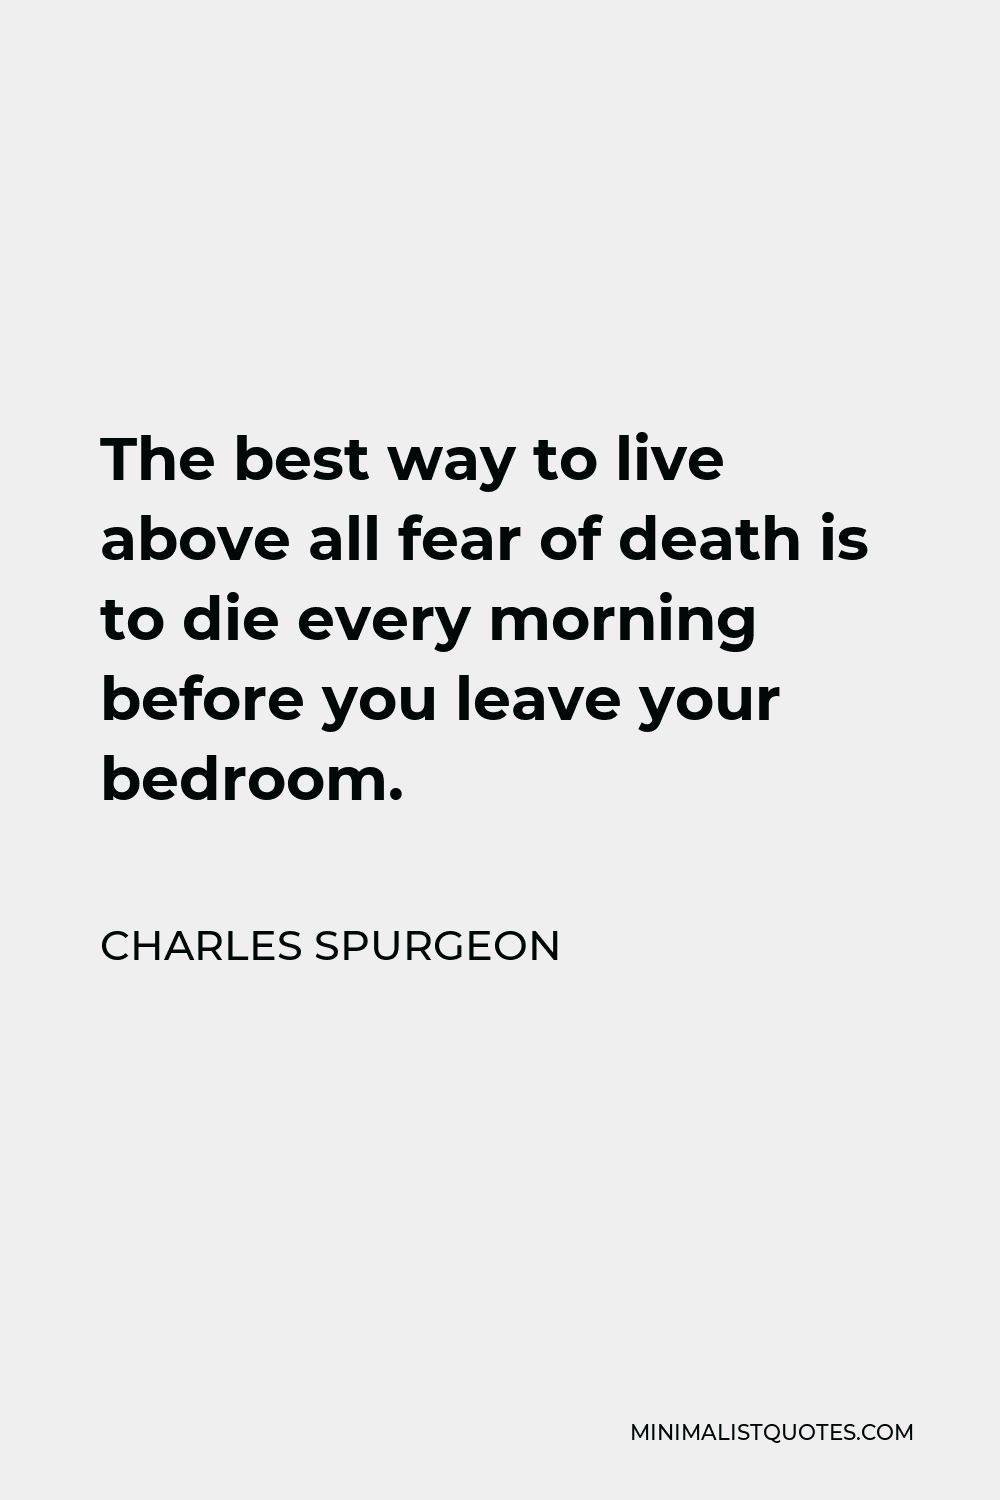 Charles Spurgeon Quote - The best way to live above all fear of death is to die every morning before you leave your bedroom.